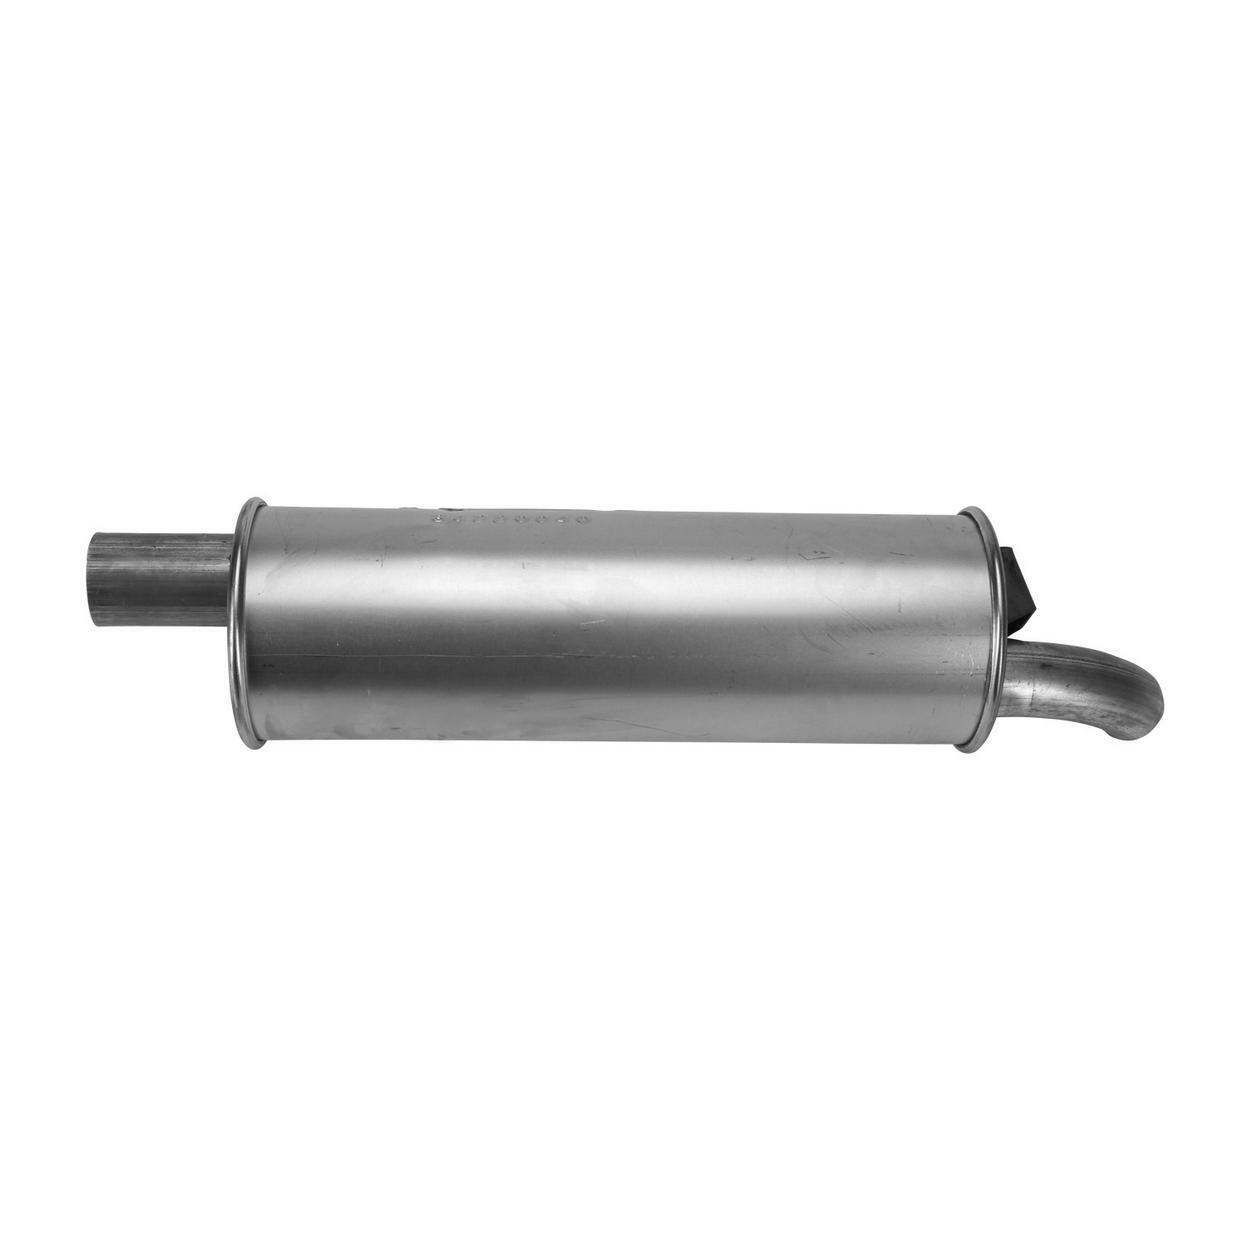 3134-GR Exhaust Muffler Fits 1986-1988 Plymouth Caravelle 2.5L L4 GAS SOHC